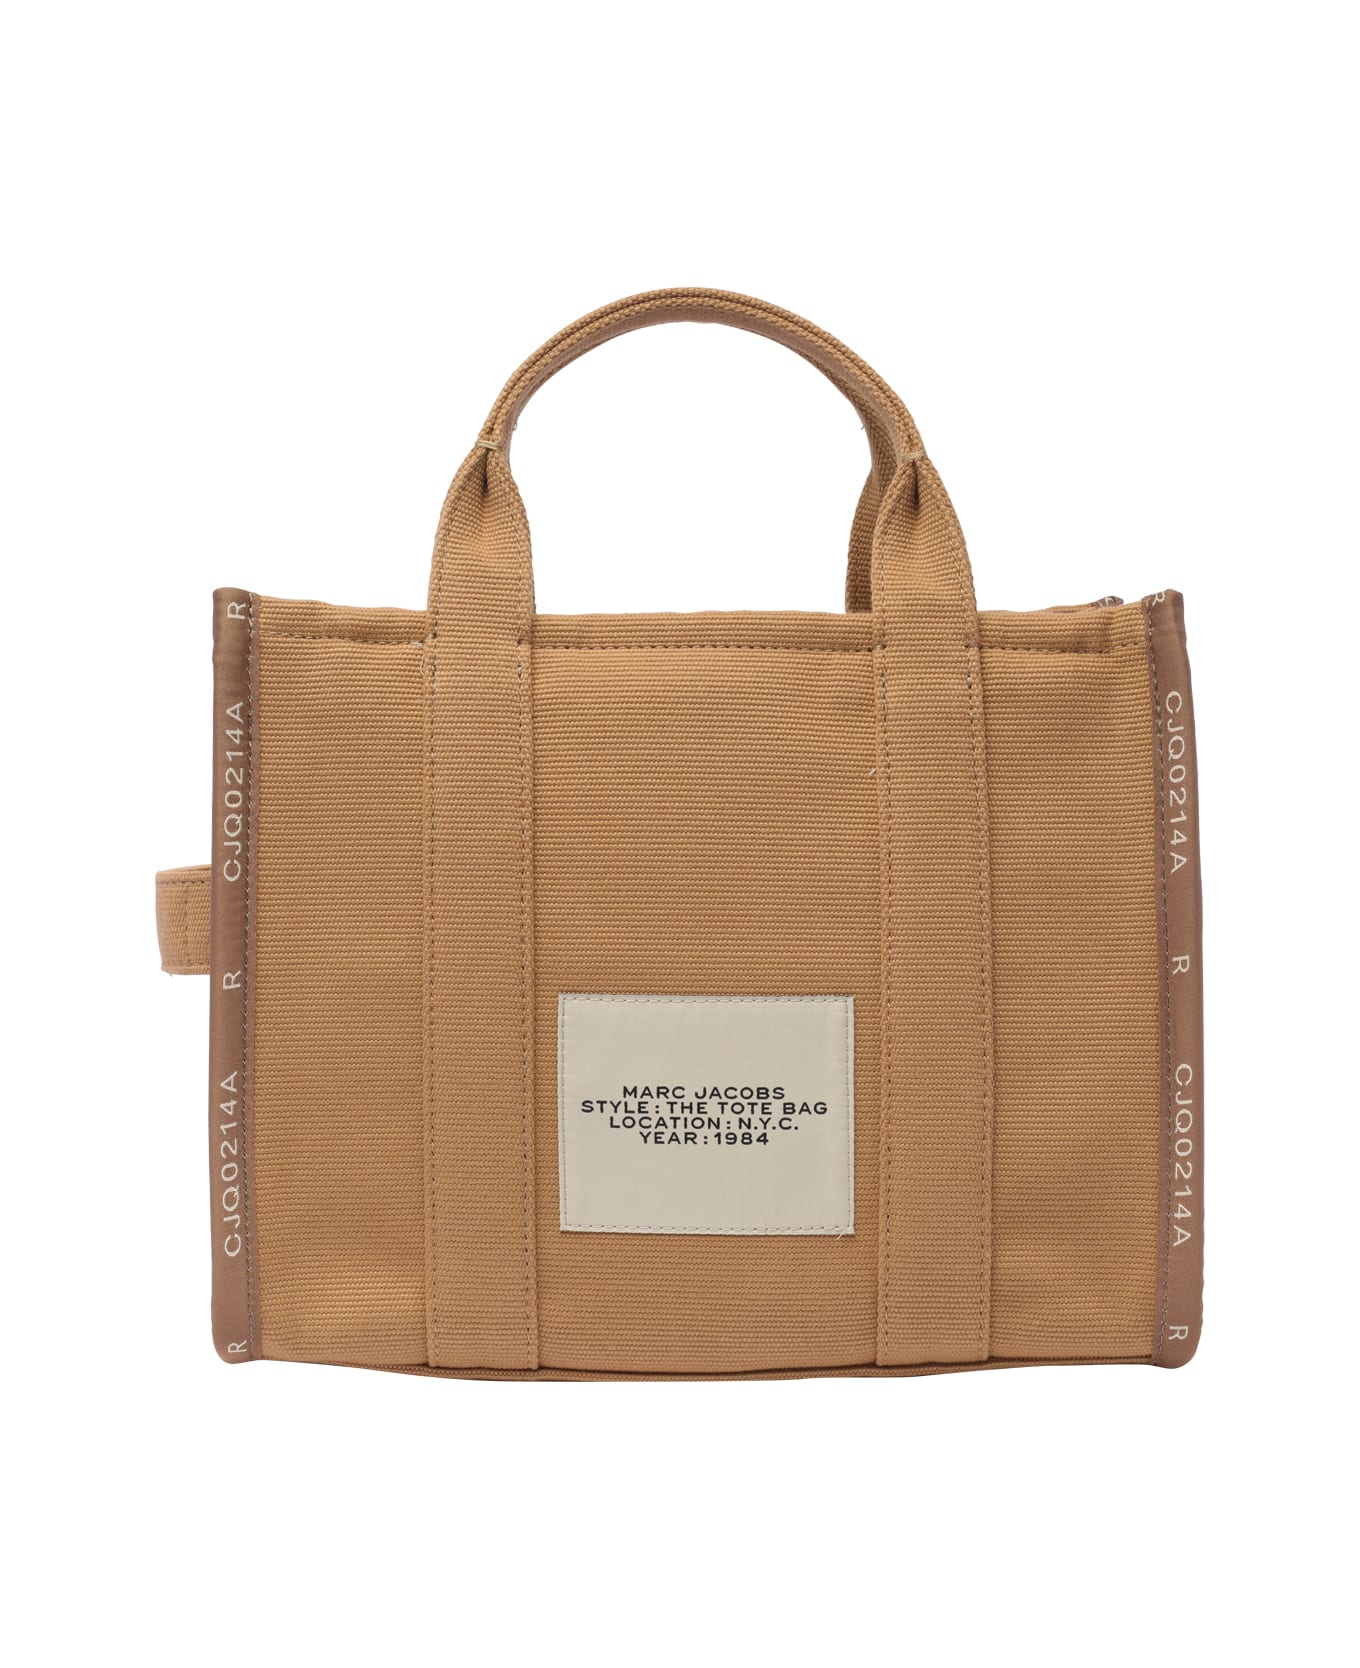 Marc Jacobs The Medium Tote Bag - Brown トートバッグ